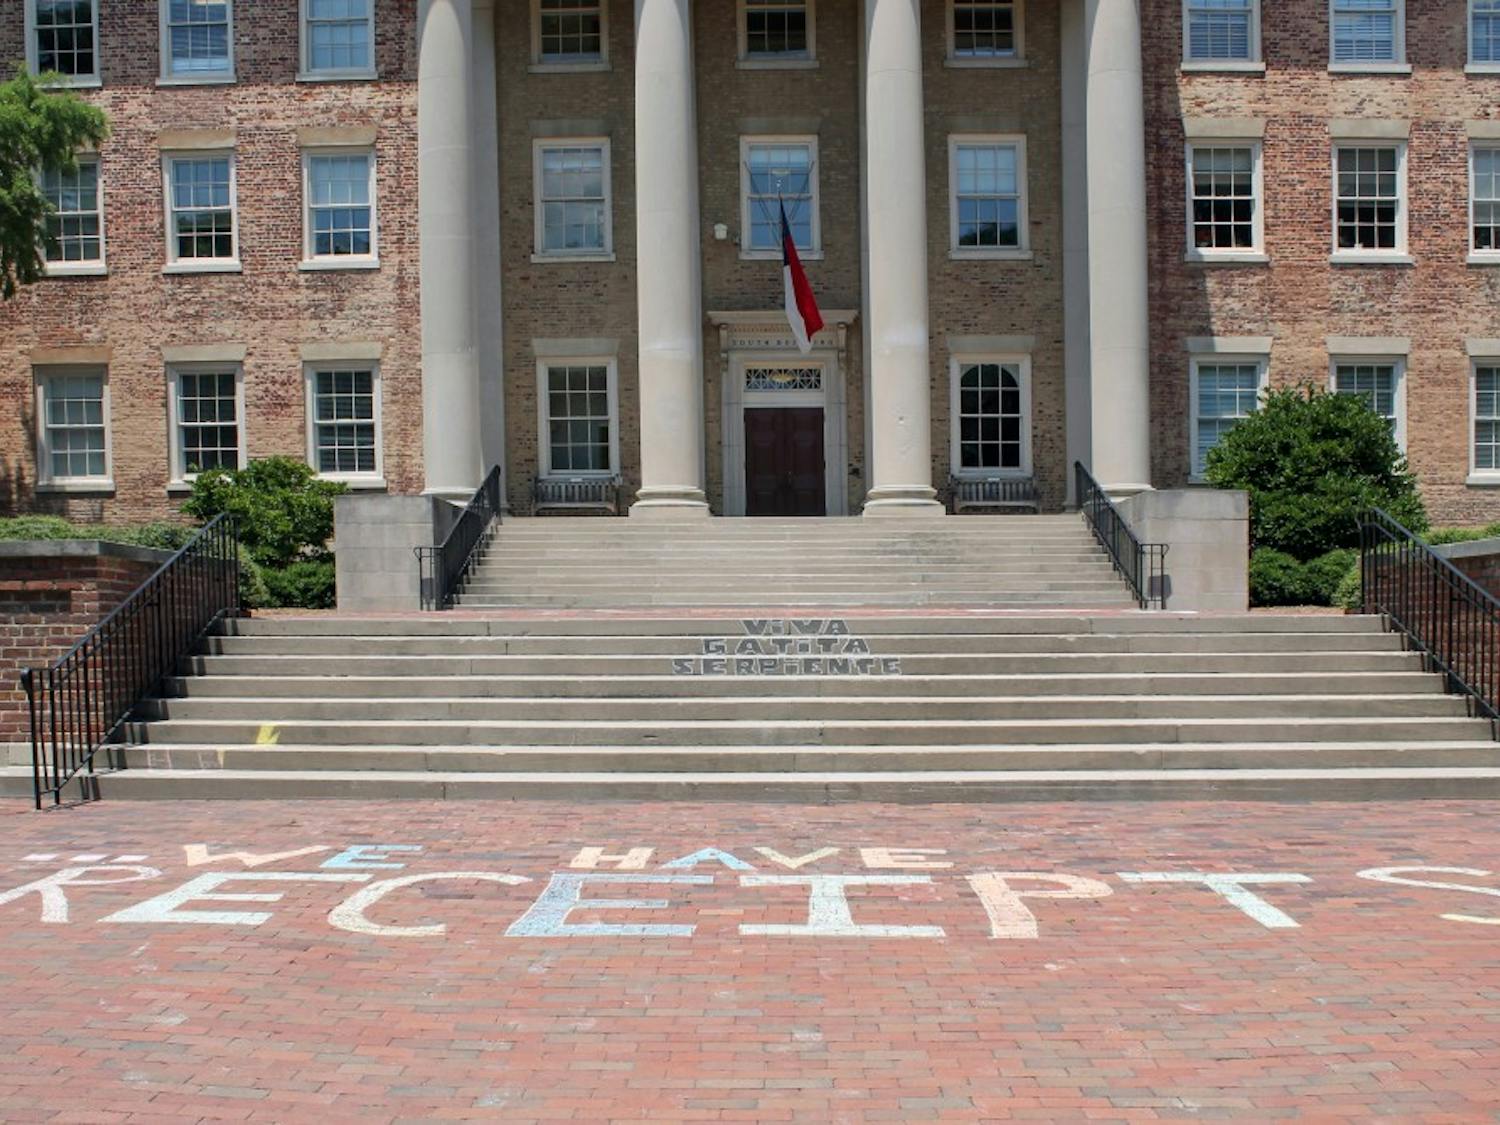 On July 11, protestors chalked "We Have Receipts" on the bricks in front of South Building. 